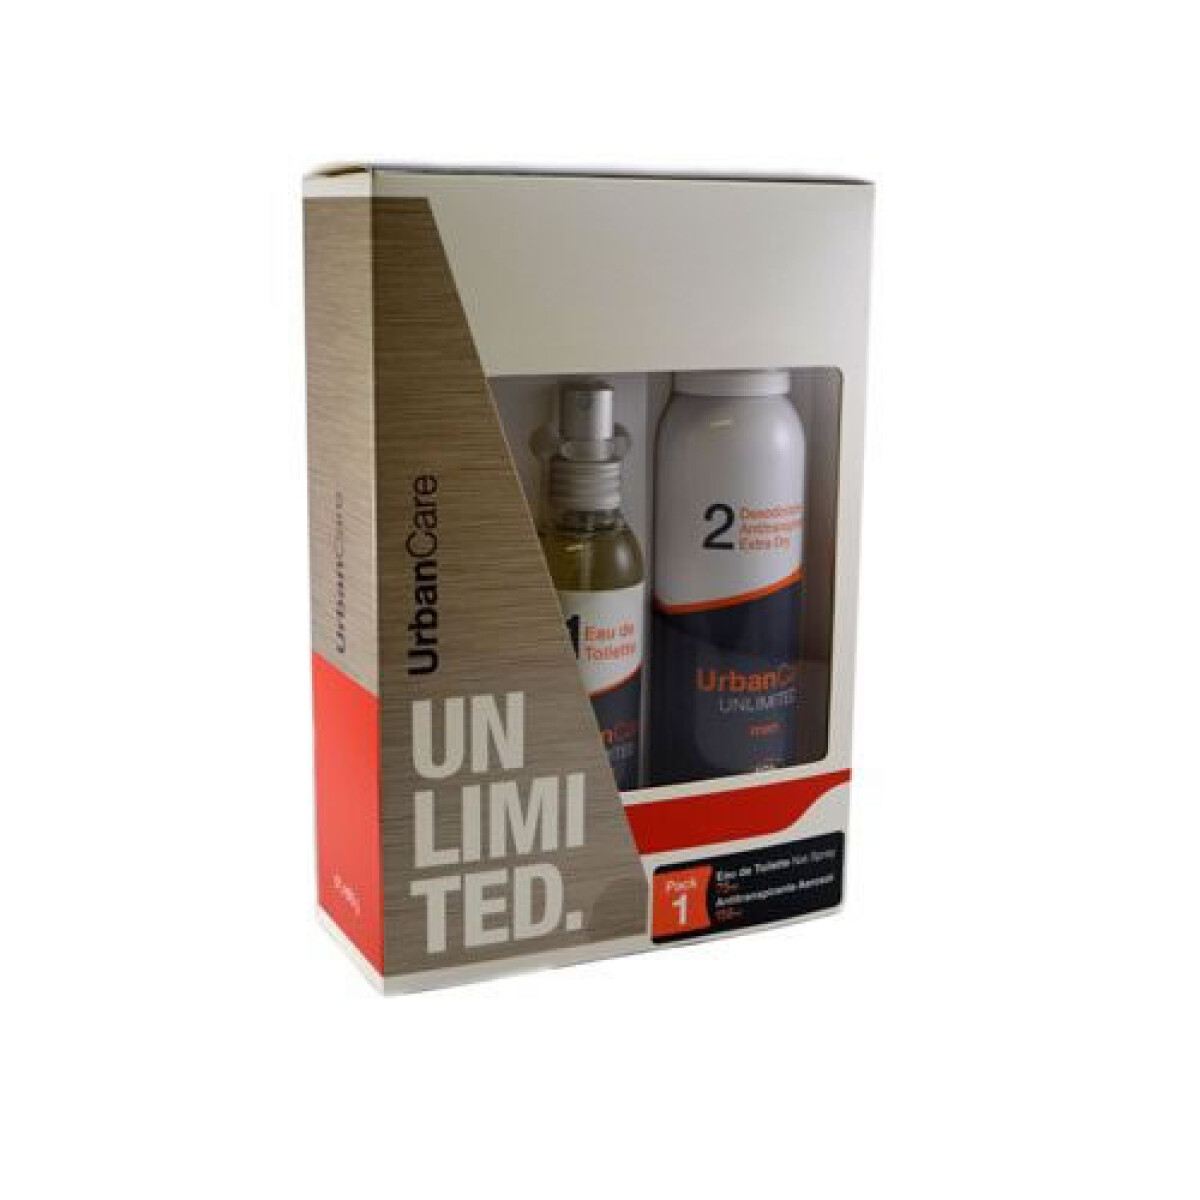 PACK URBAN CARE UNLIMITED EDT + DEO AER 